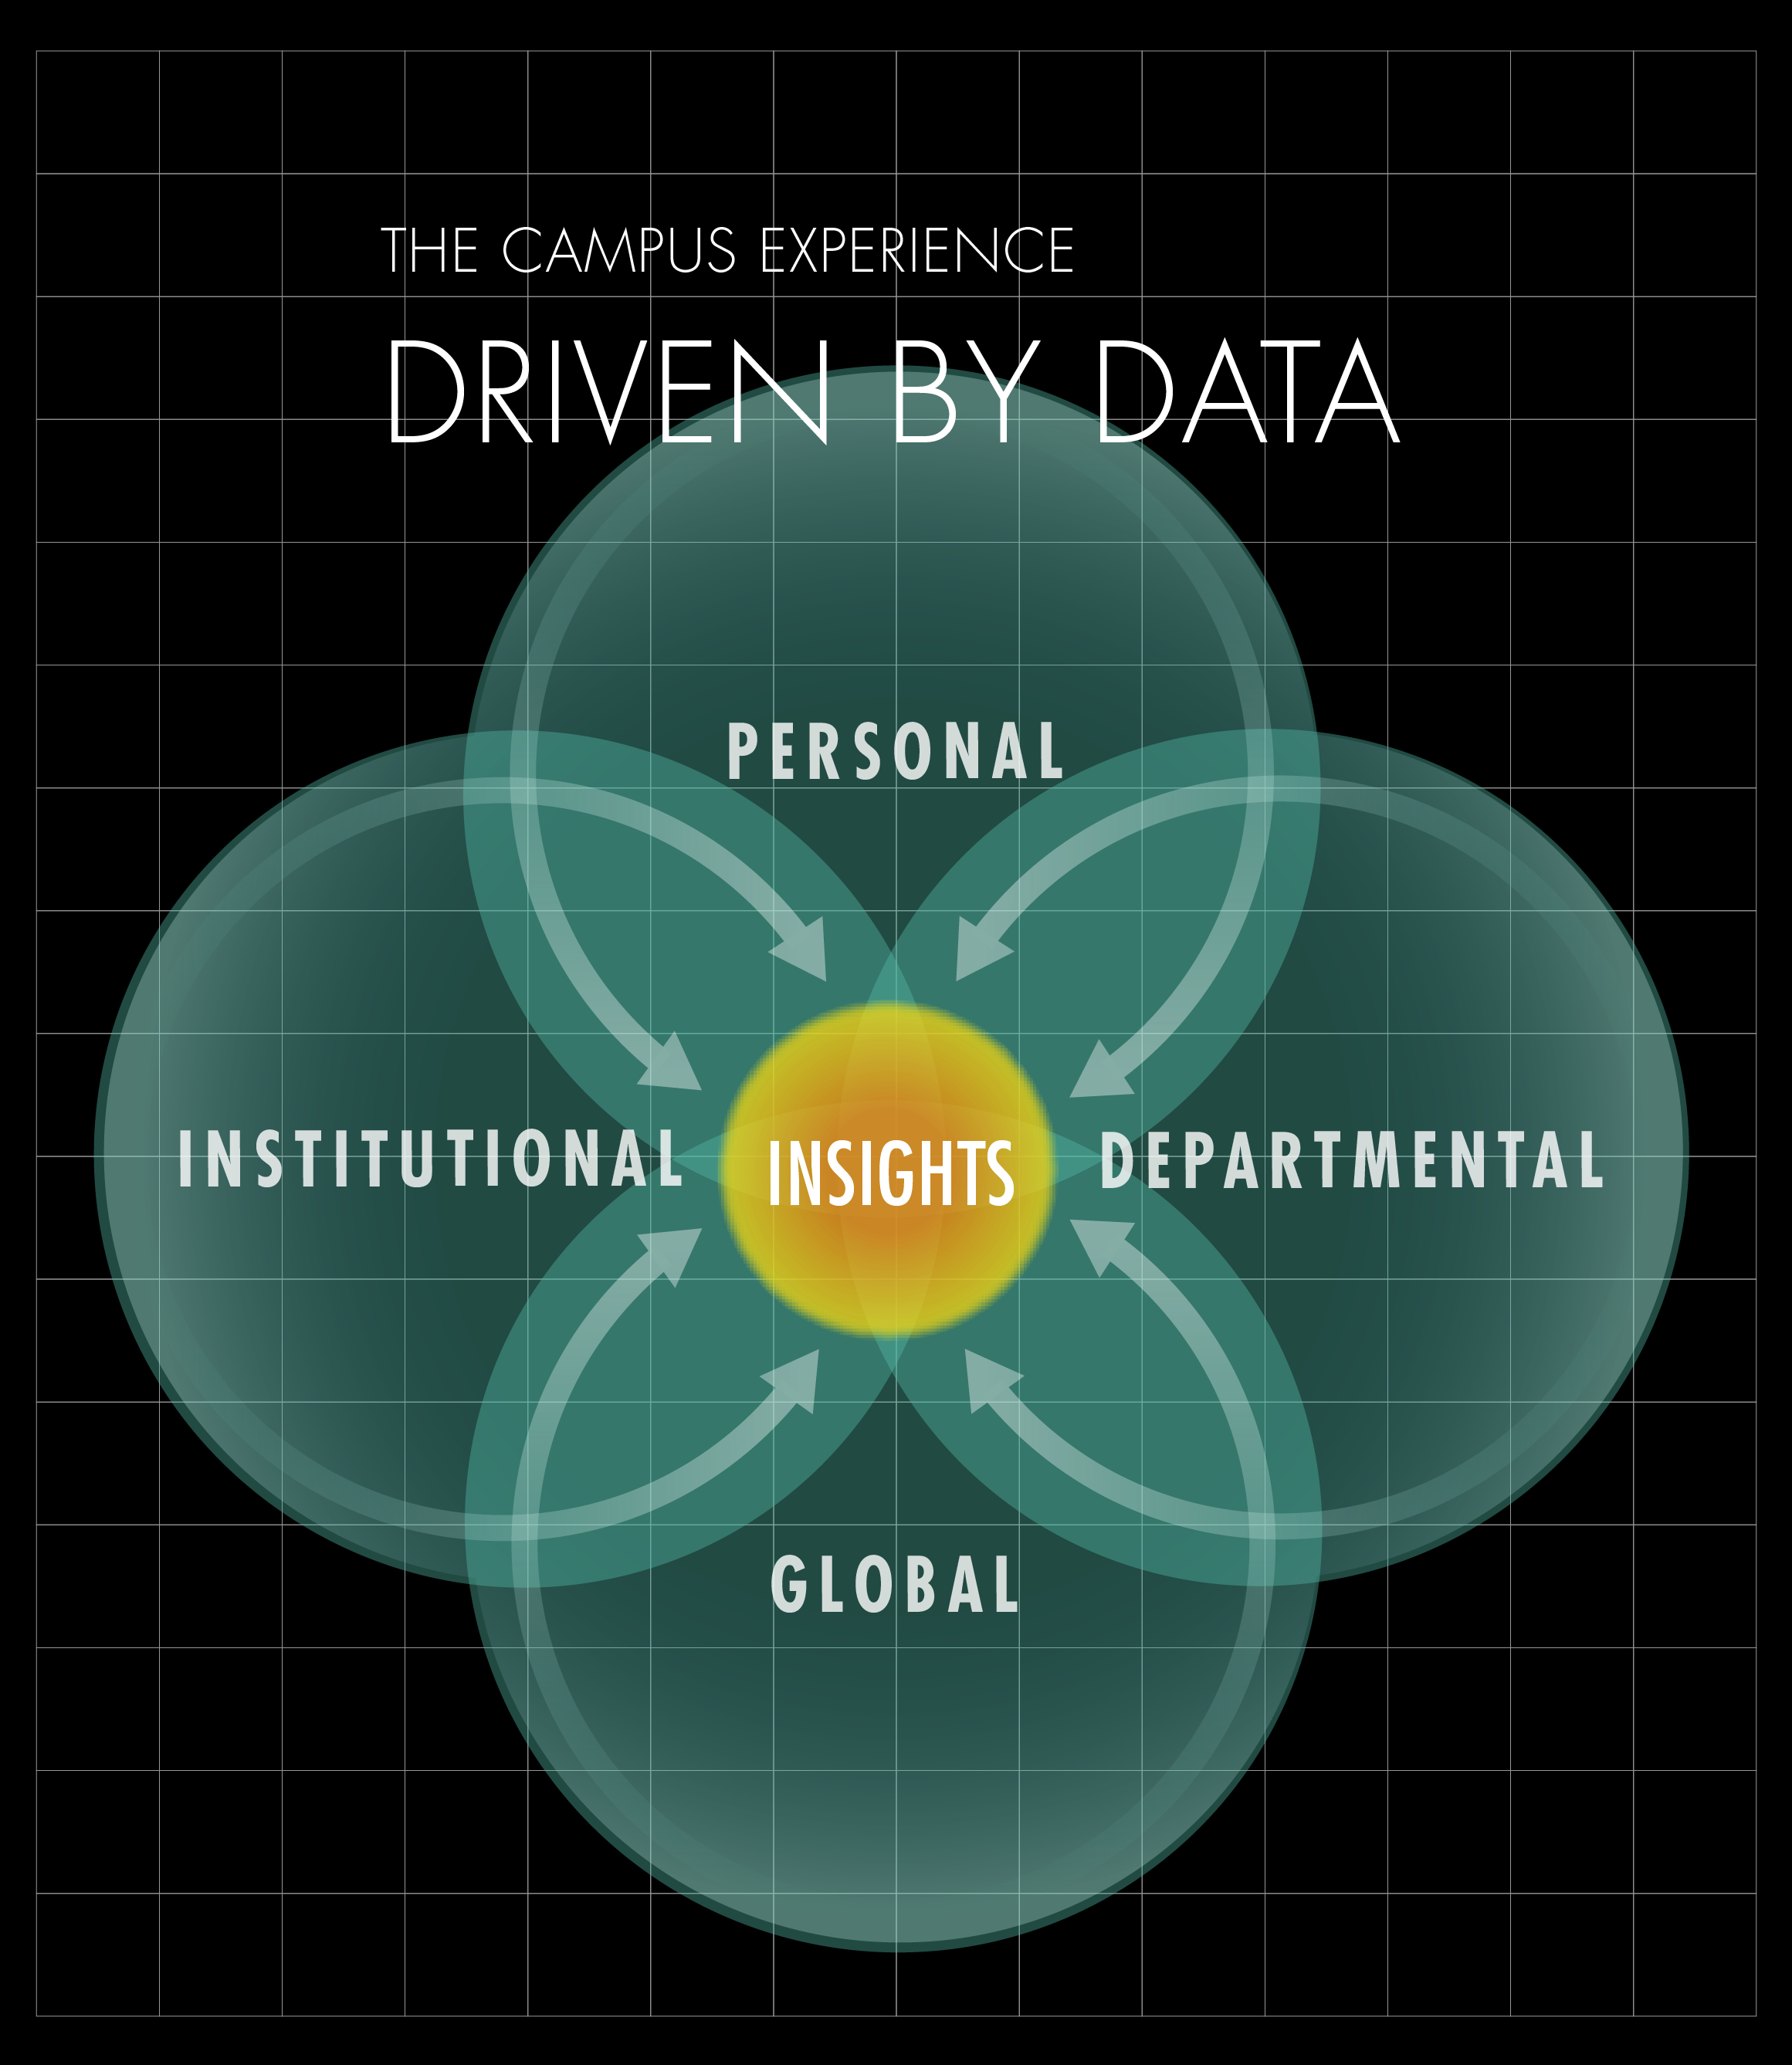 The Campus Experience DRIVEN BY DATA